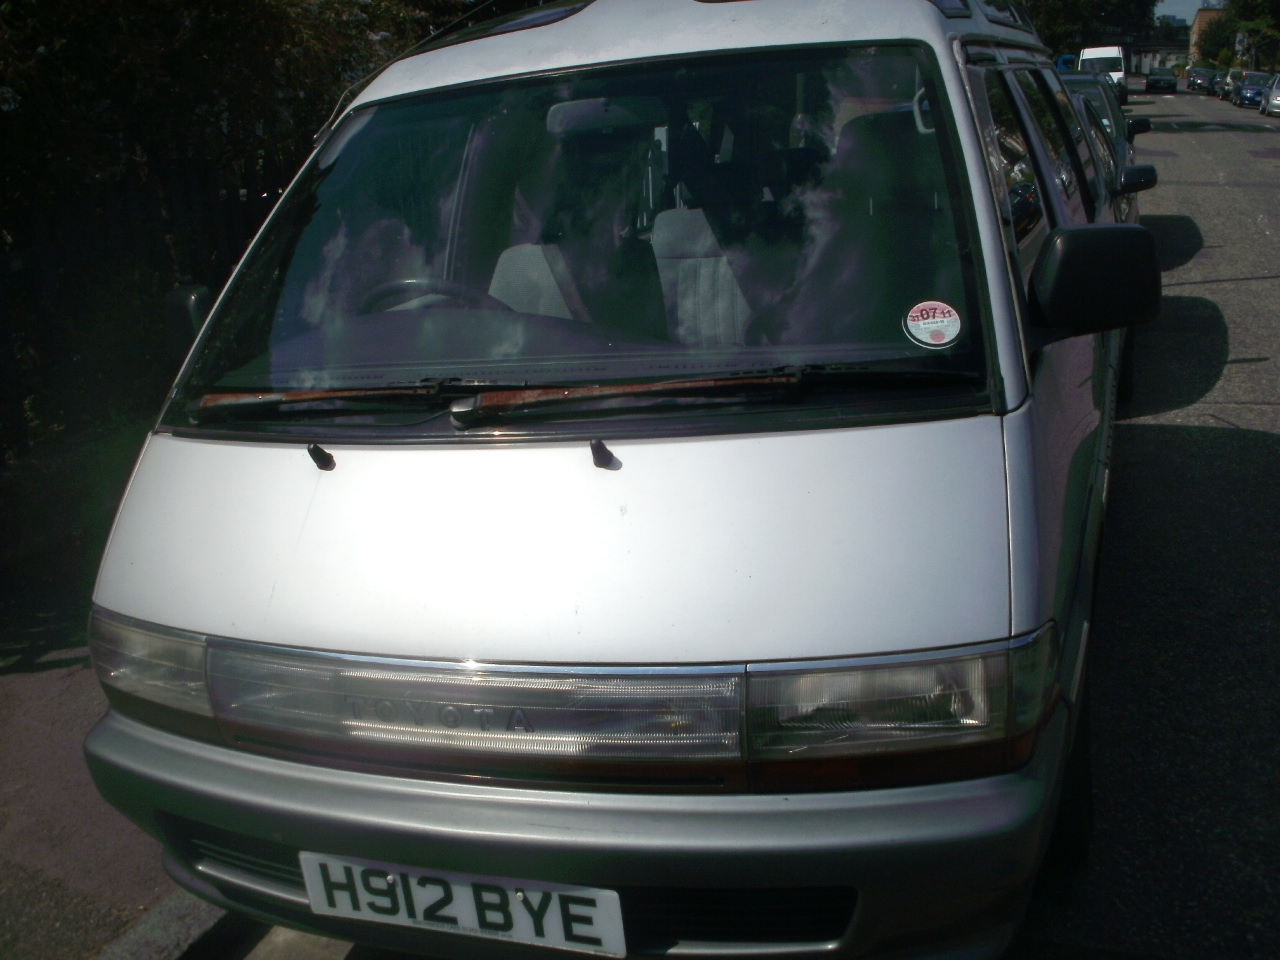 Toyota space cruiser for sale uk